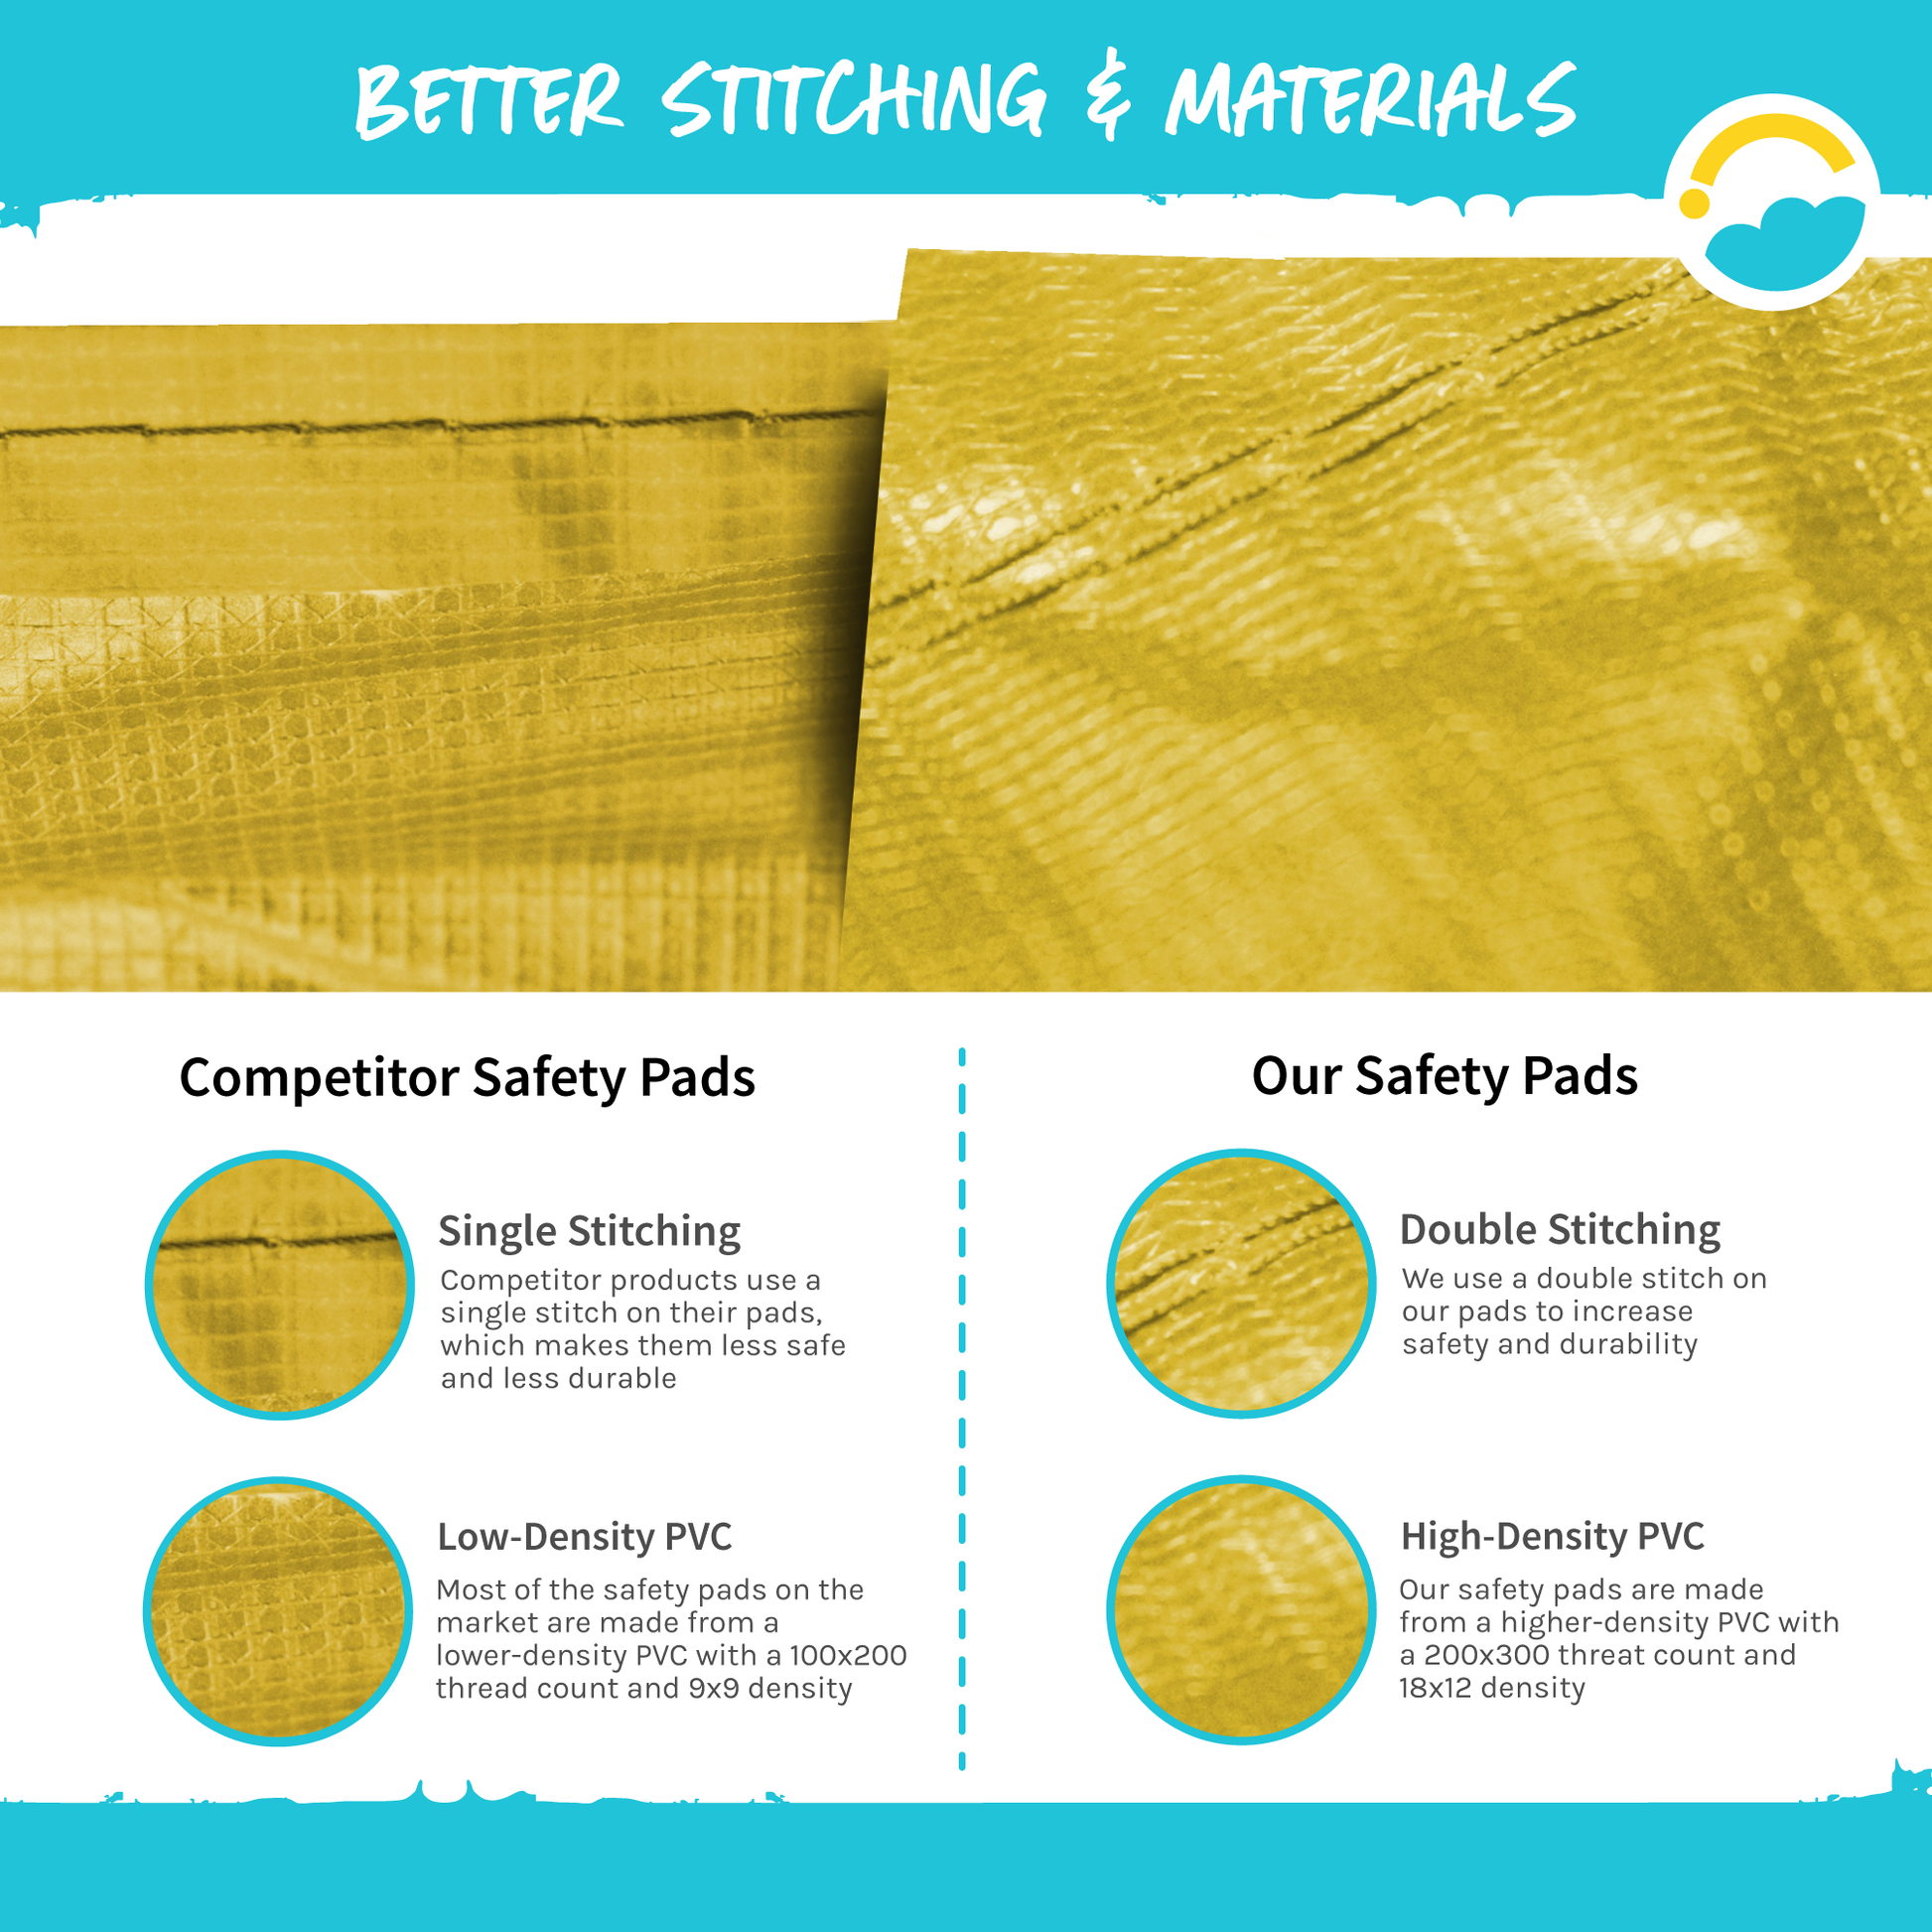 Better Stitching and Materials: Competitor Safety Pads Single Stitching and Low-Density PVC (100x200 thread count and 9x9 density). Our Safety Pads: Double Stitching and High-Density PVC (200x300 thread count and 18x12 density)